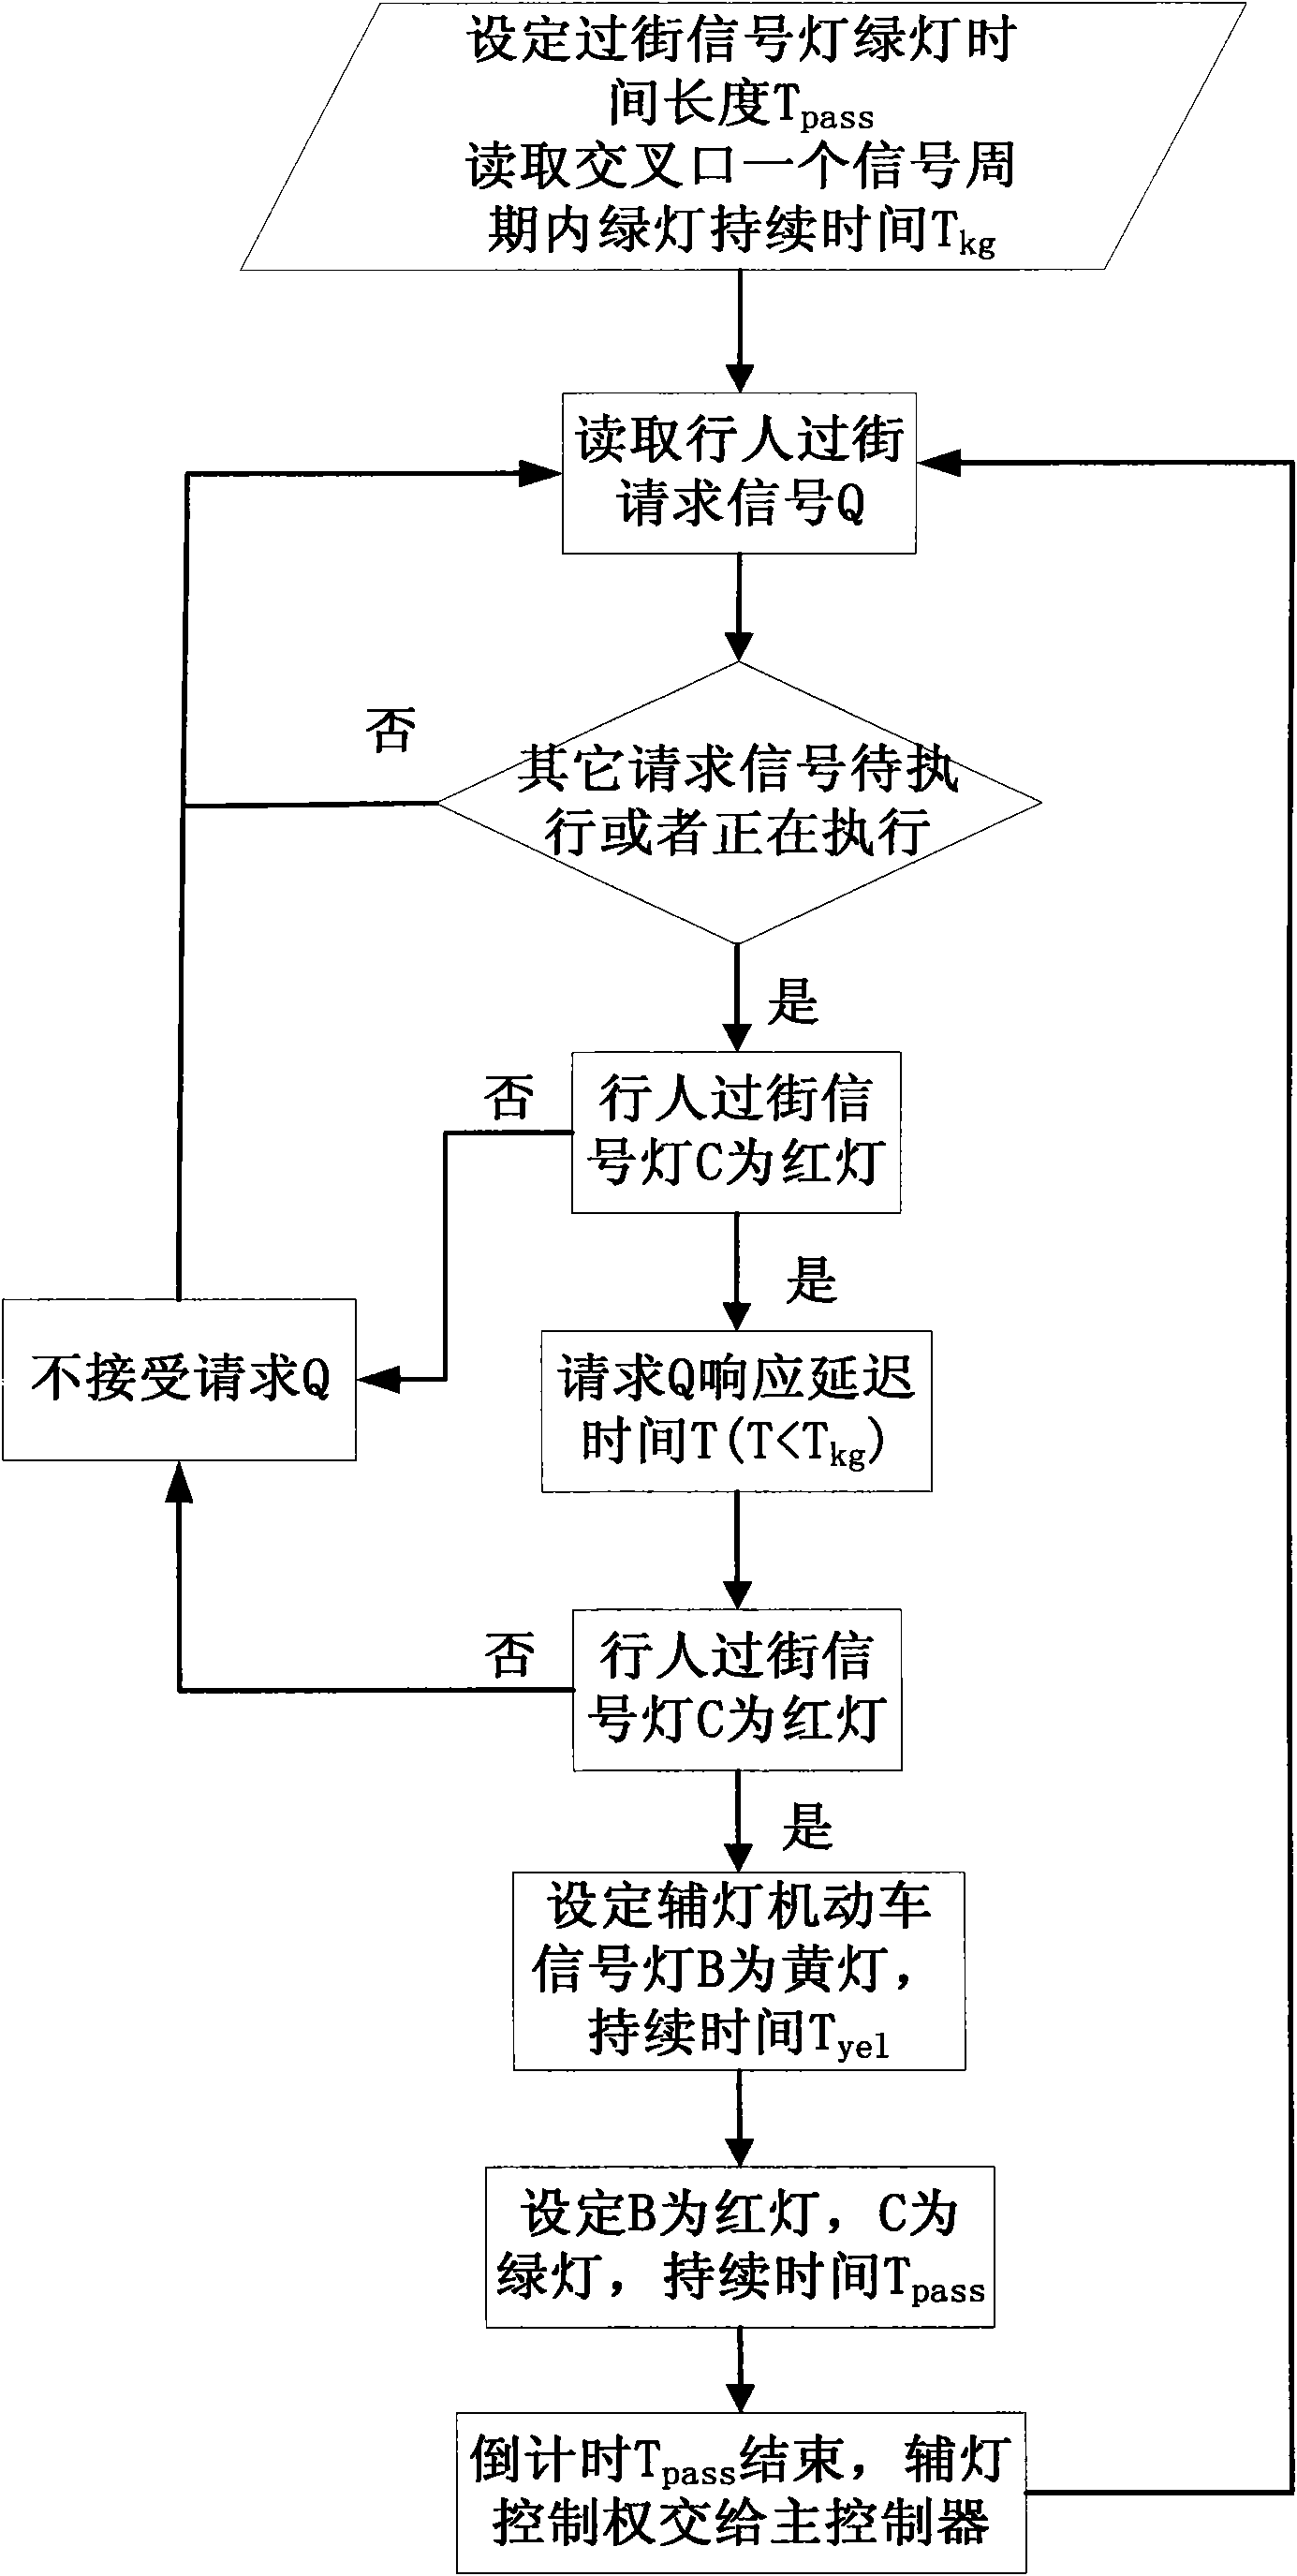 Auxiliary lamp control method of traffic main and auxiliary lamp signal system